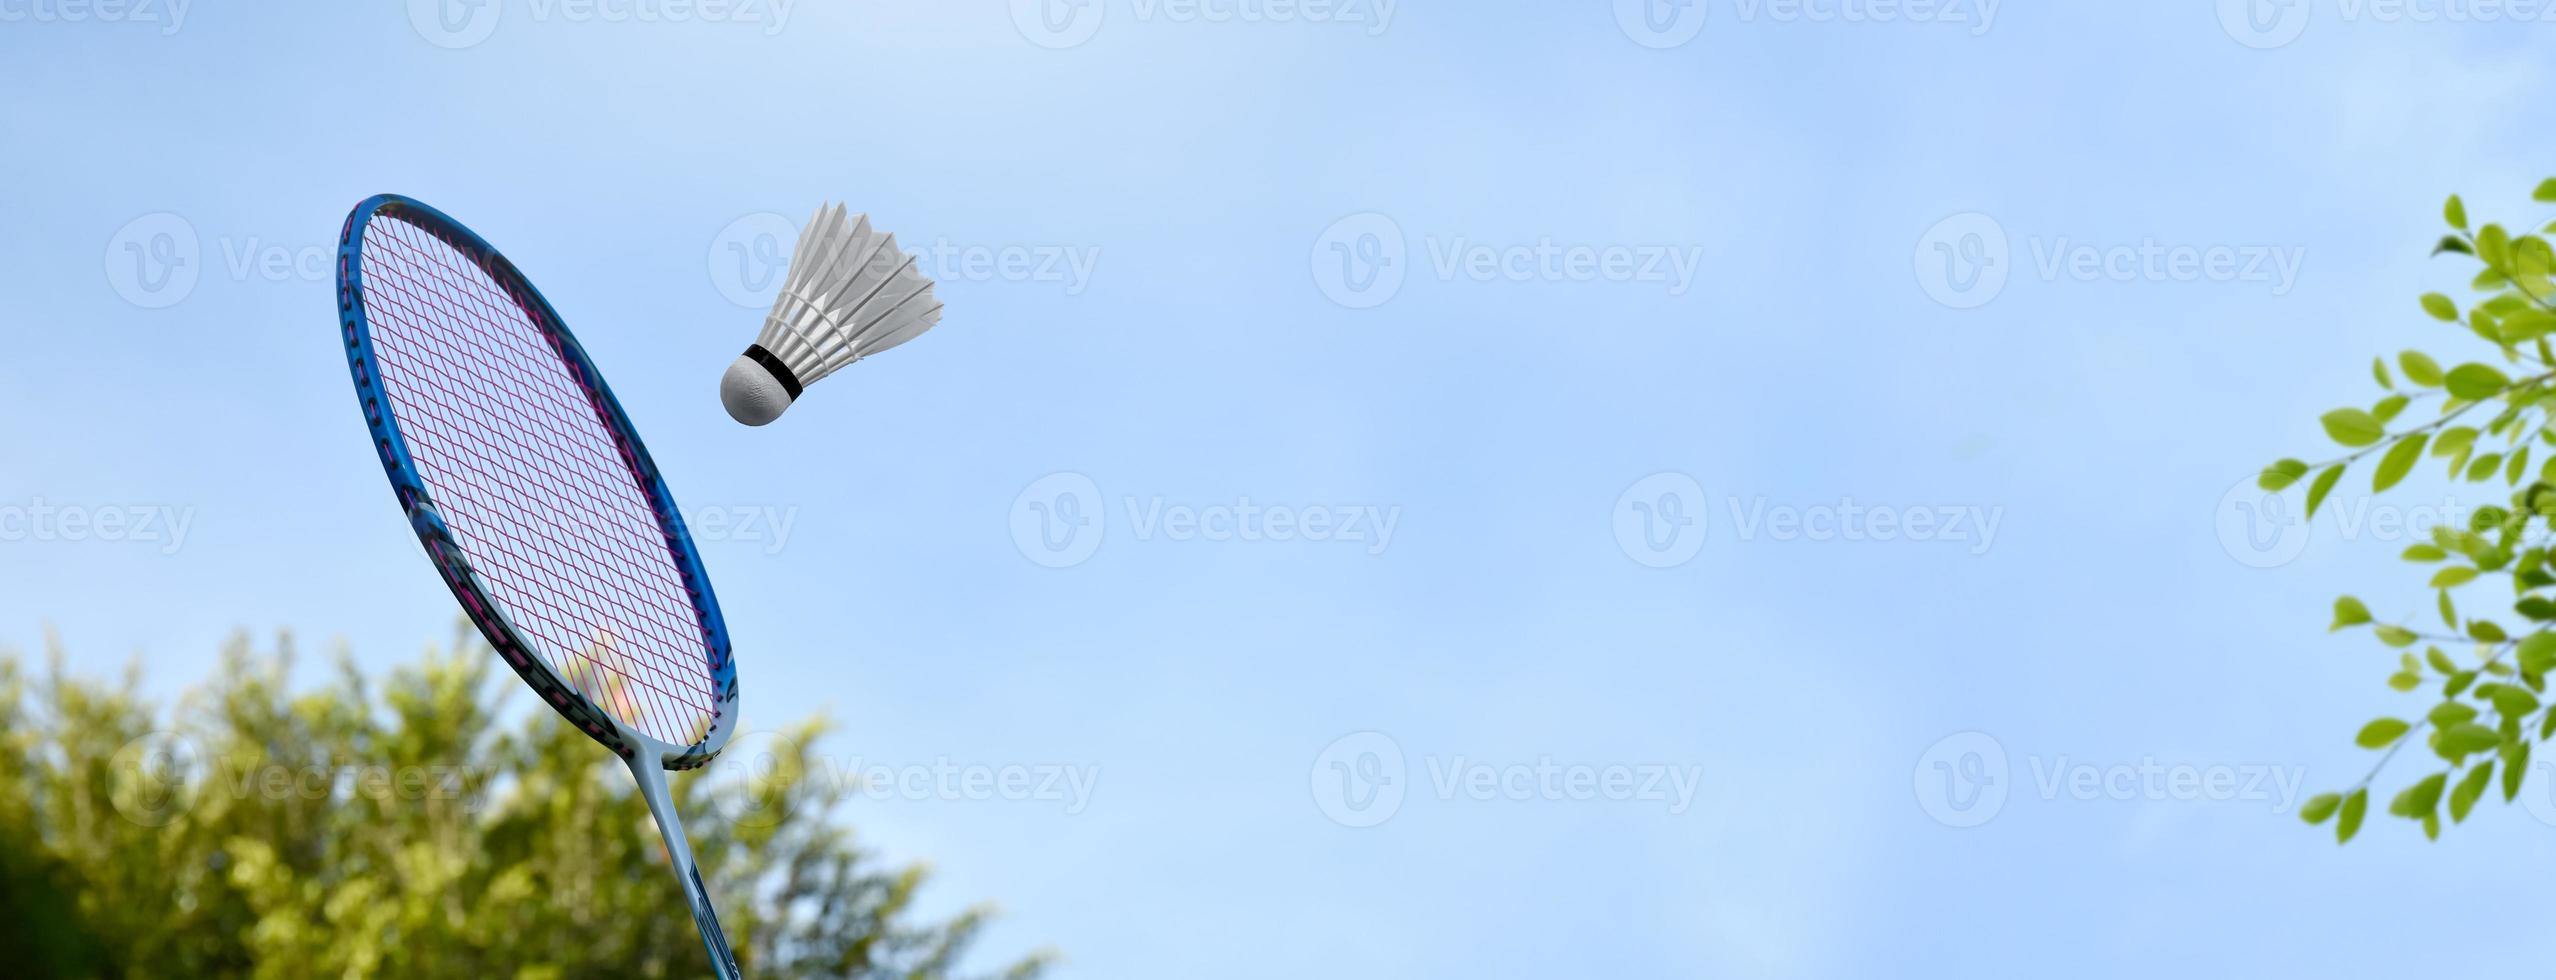 Badminton racket and white shuttlecock with bluesky and trees background, outdoor badminton playing in freetime and recreational activity concept, soft and selective focus. photo